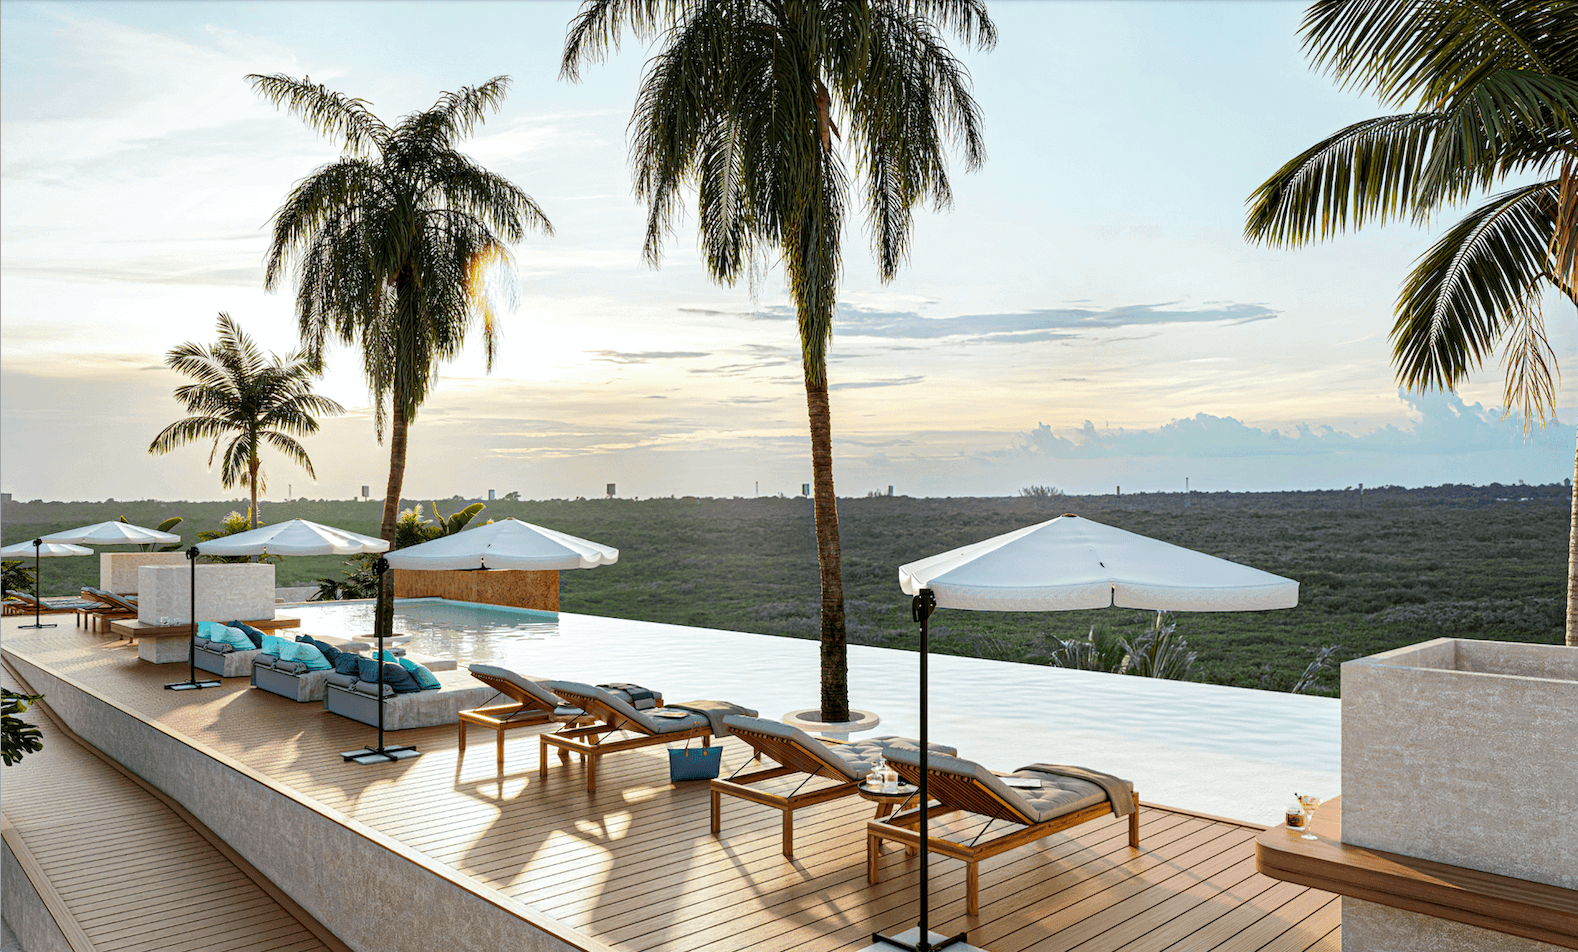 Penthouse near the sea, lock off system, sky pool, coworking, pre-construction, for sale Tankah, Tulum.